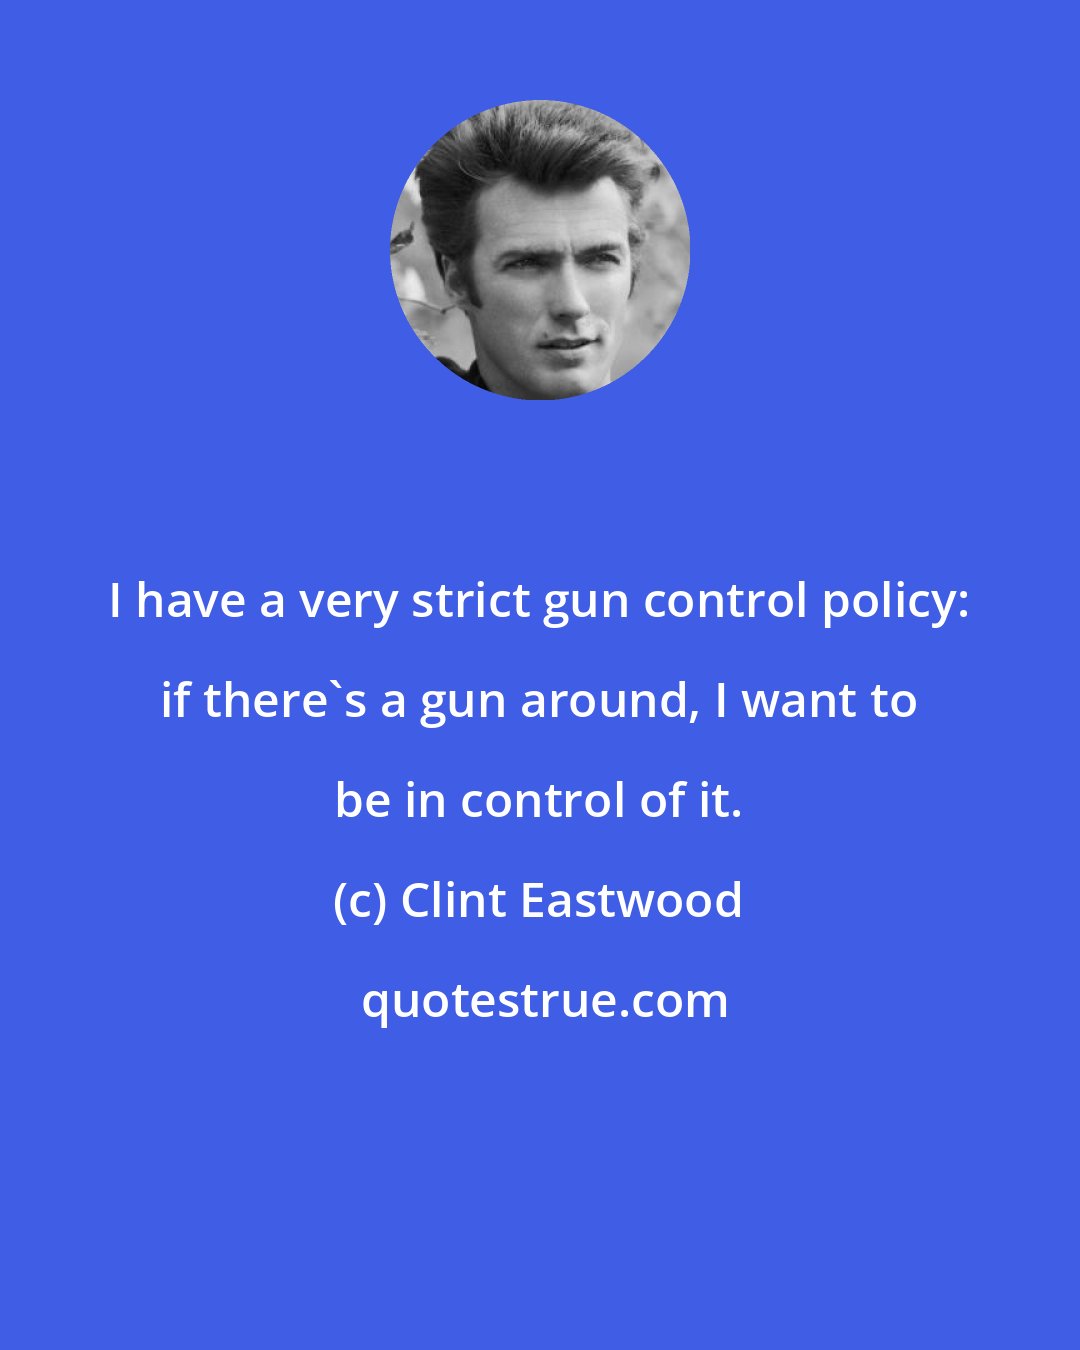 Clint Eastwood: I have a very strict gun control policy: if there's a gun around, I want to be in control of it.